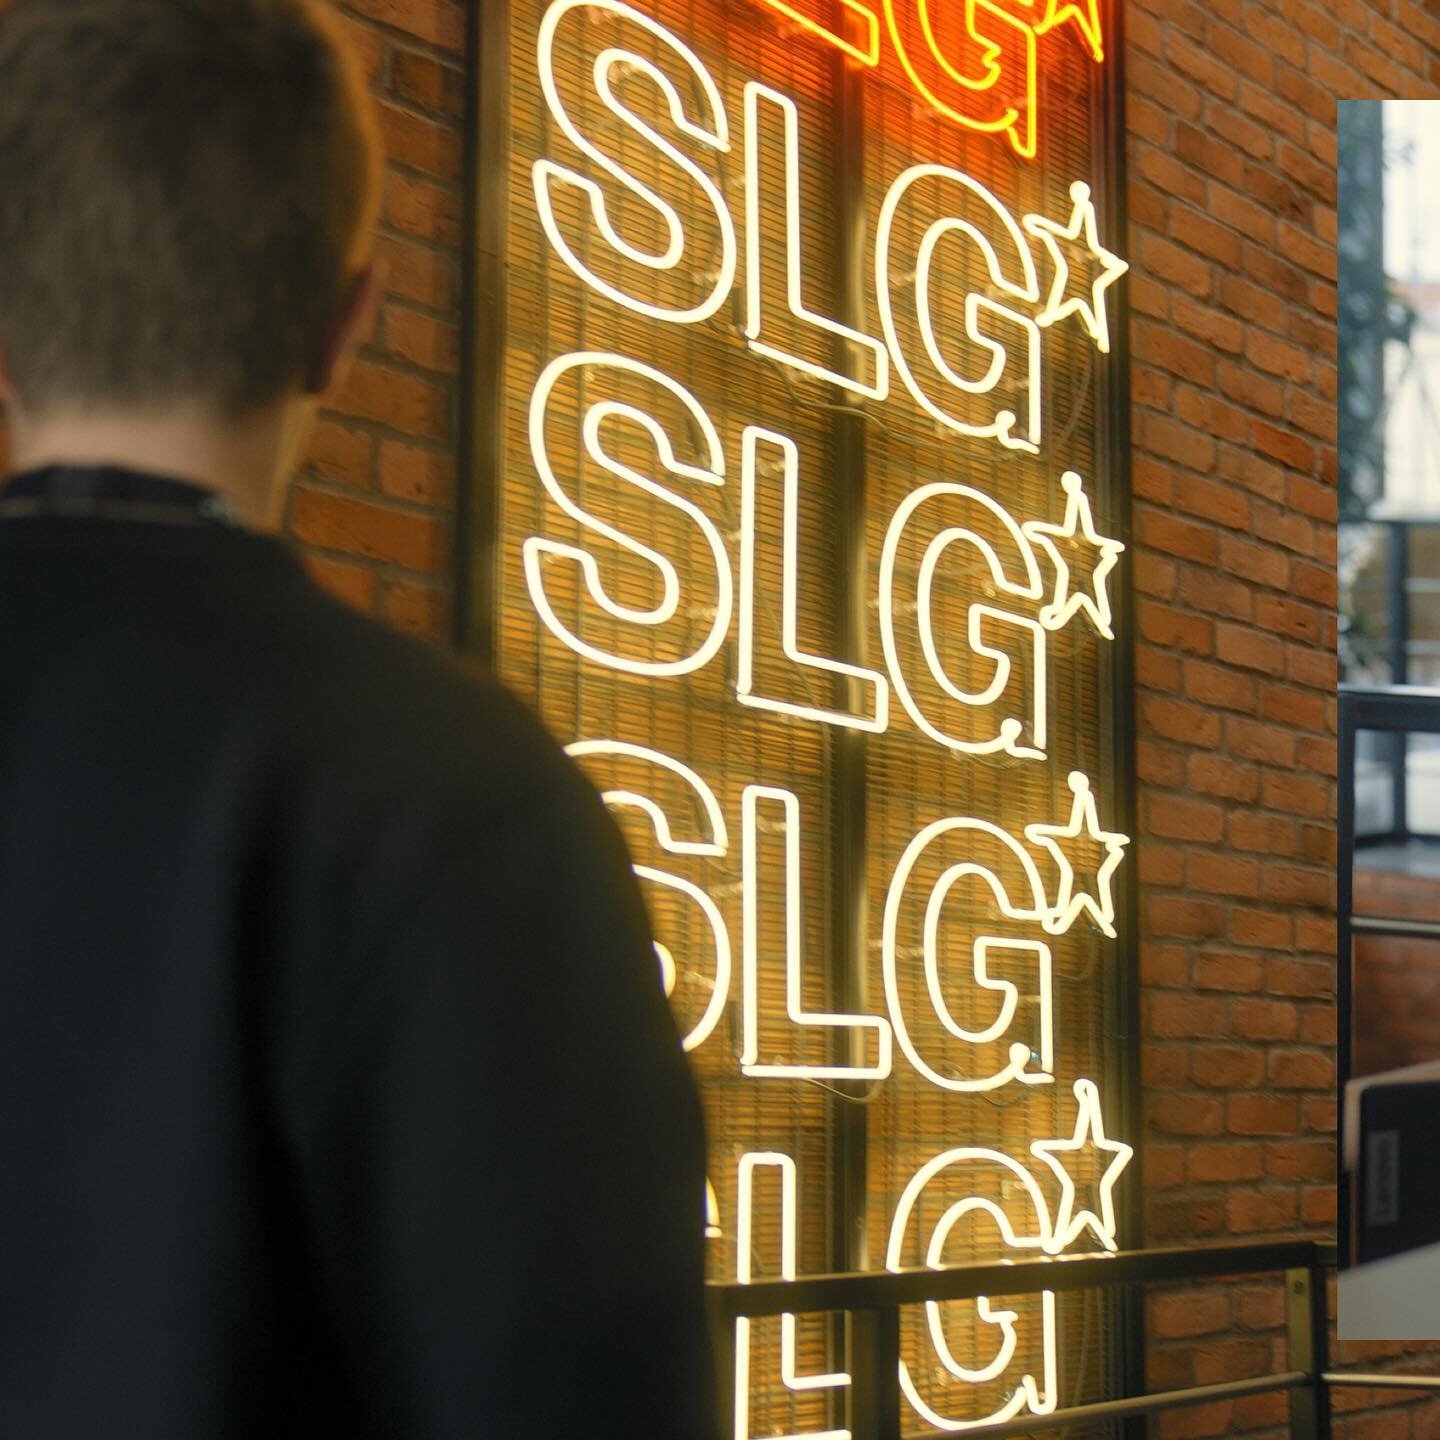 New work with @gloscol x @slgbrands x @tlevels_govuk check out the glos col insta for the edit. Shot on the Fx3 and an old &lsquo;dadcam&rsquo;. SLG offices are amazing. #tlevels #gloscol #slgbrands #videoproduction #fluxxfilms